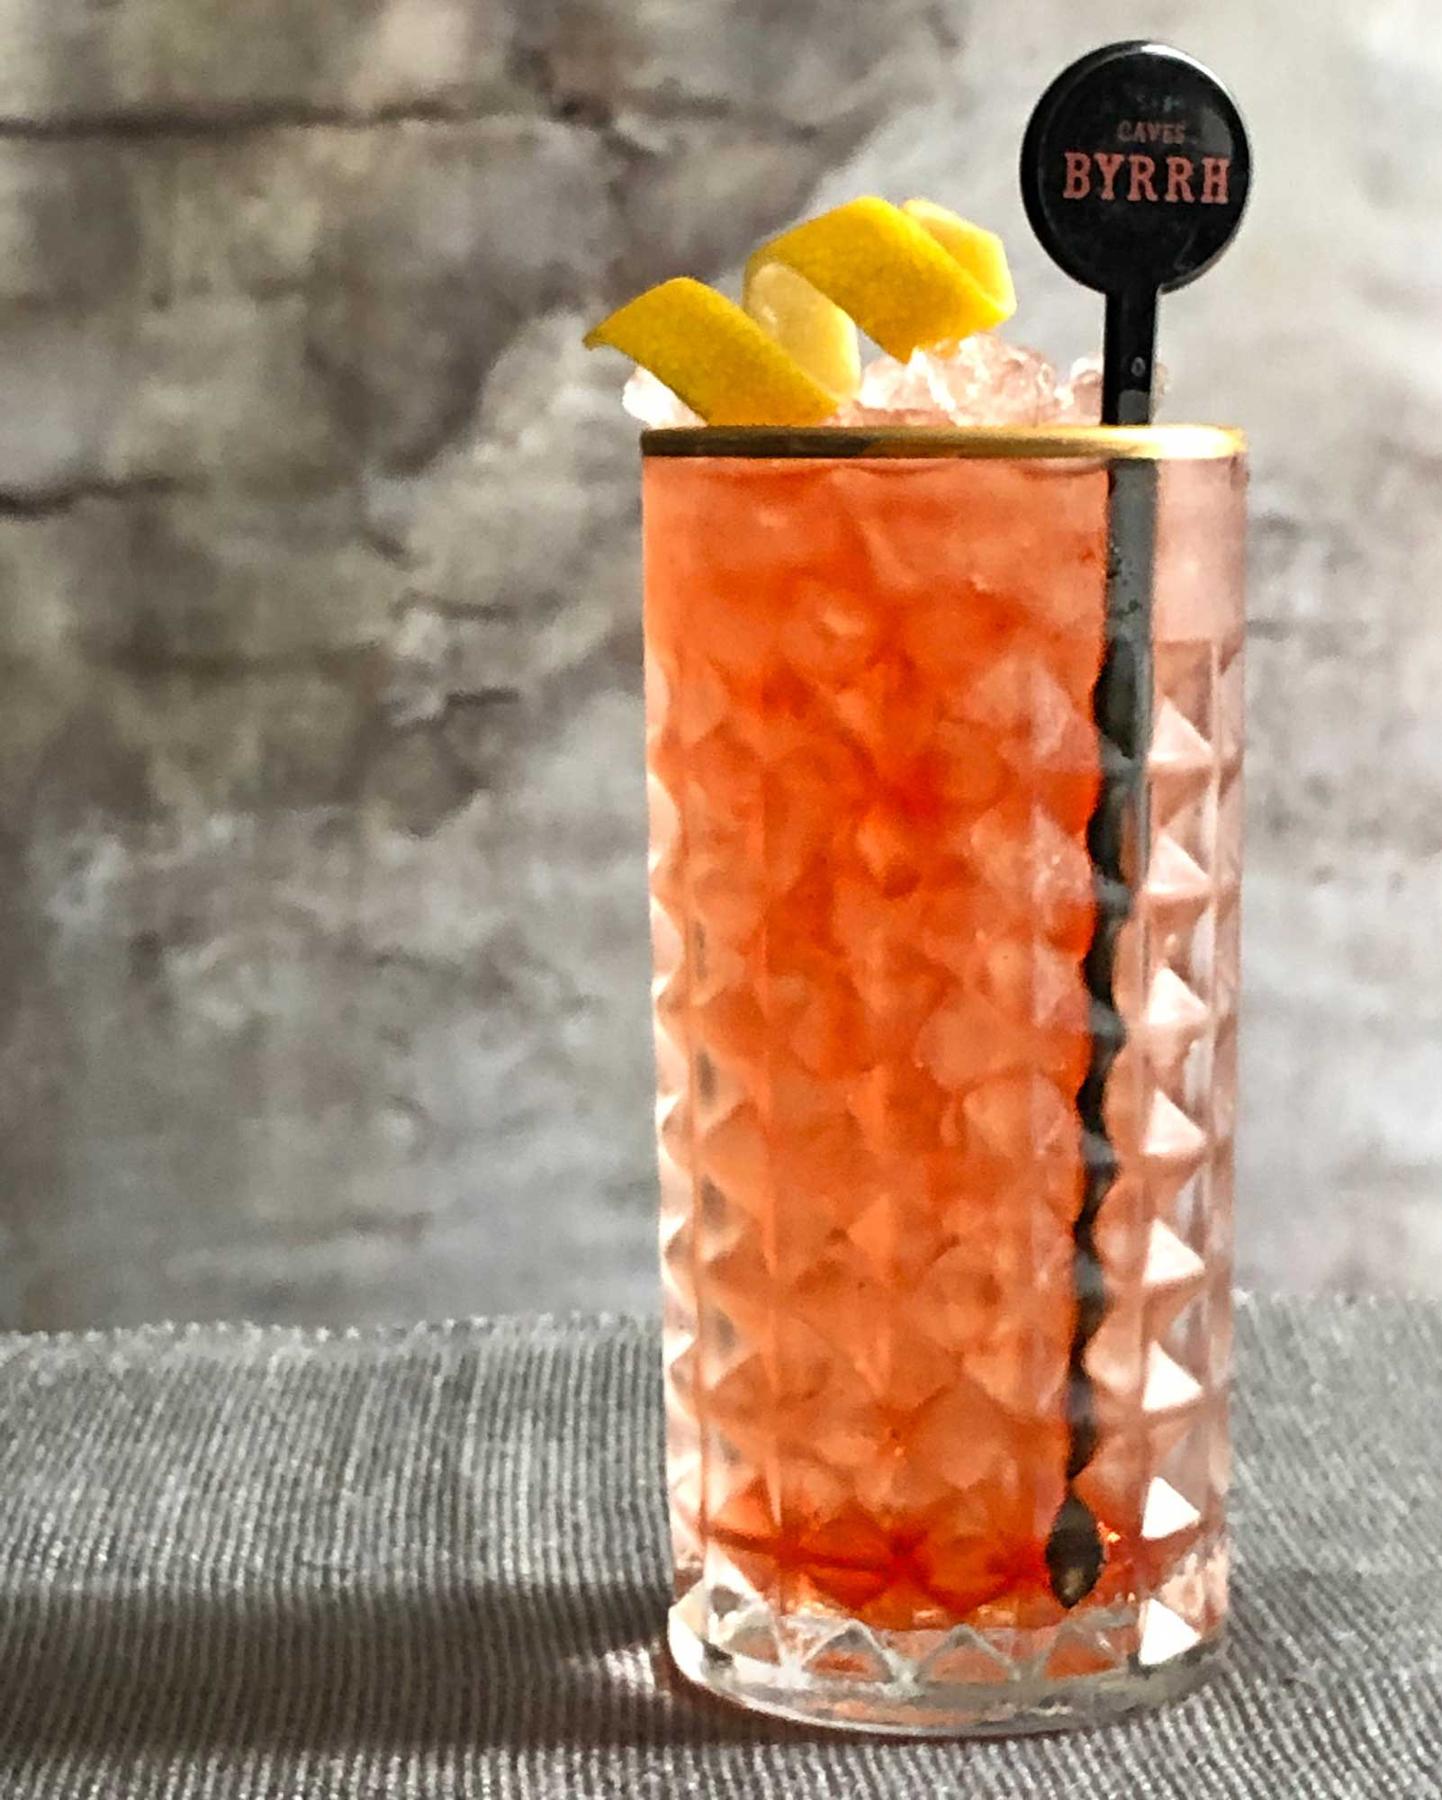 An example of the Passa Paloma, the mixed drink (drink), by Figidini, Providence, RI, featuring grapefruit soda, blanco tequila, Byrrh Grand Quinquina, and lemon twist; photo by Lee Edwards